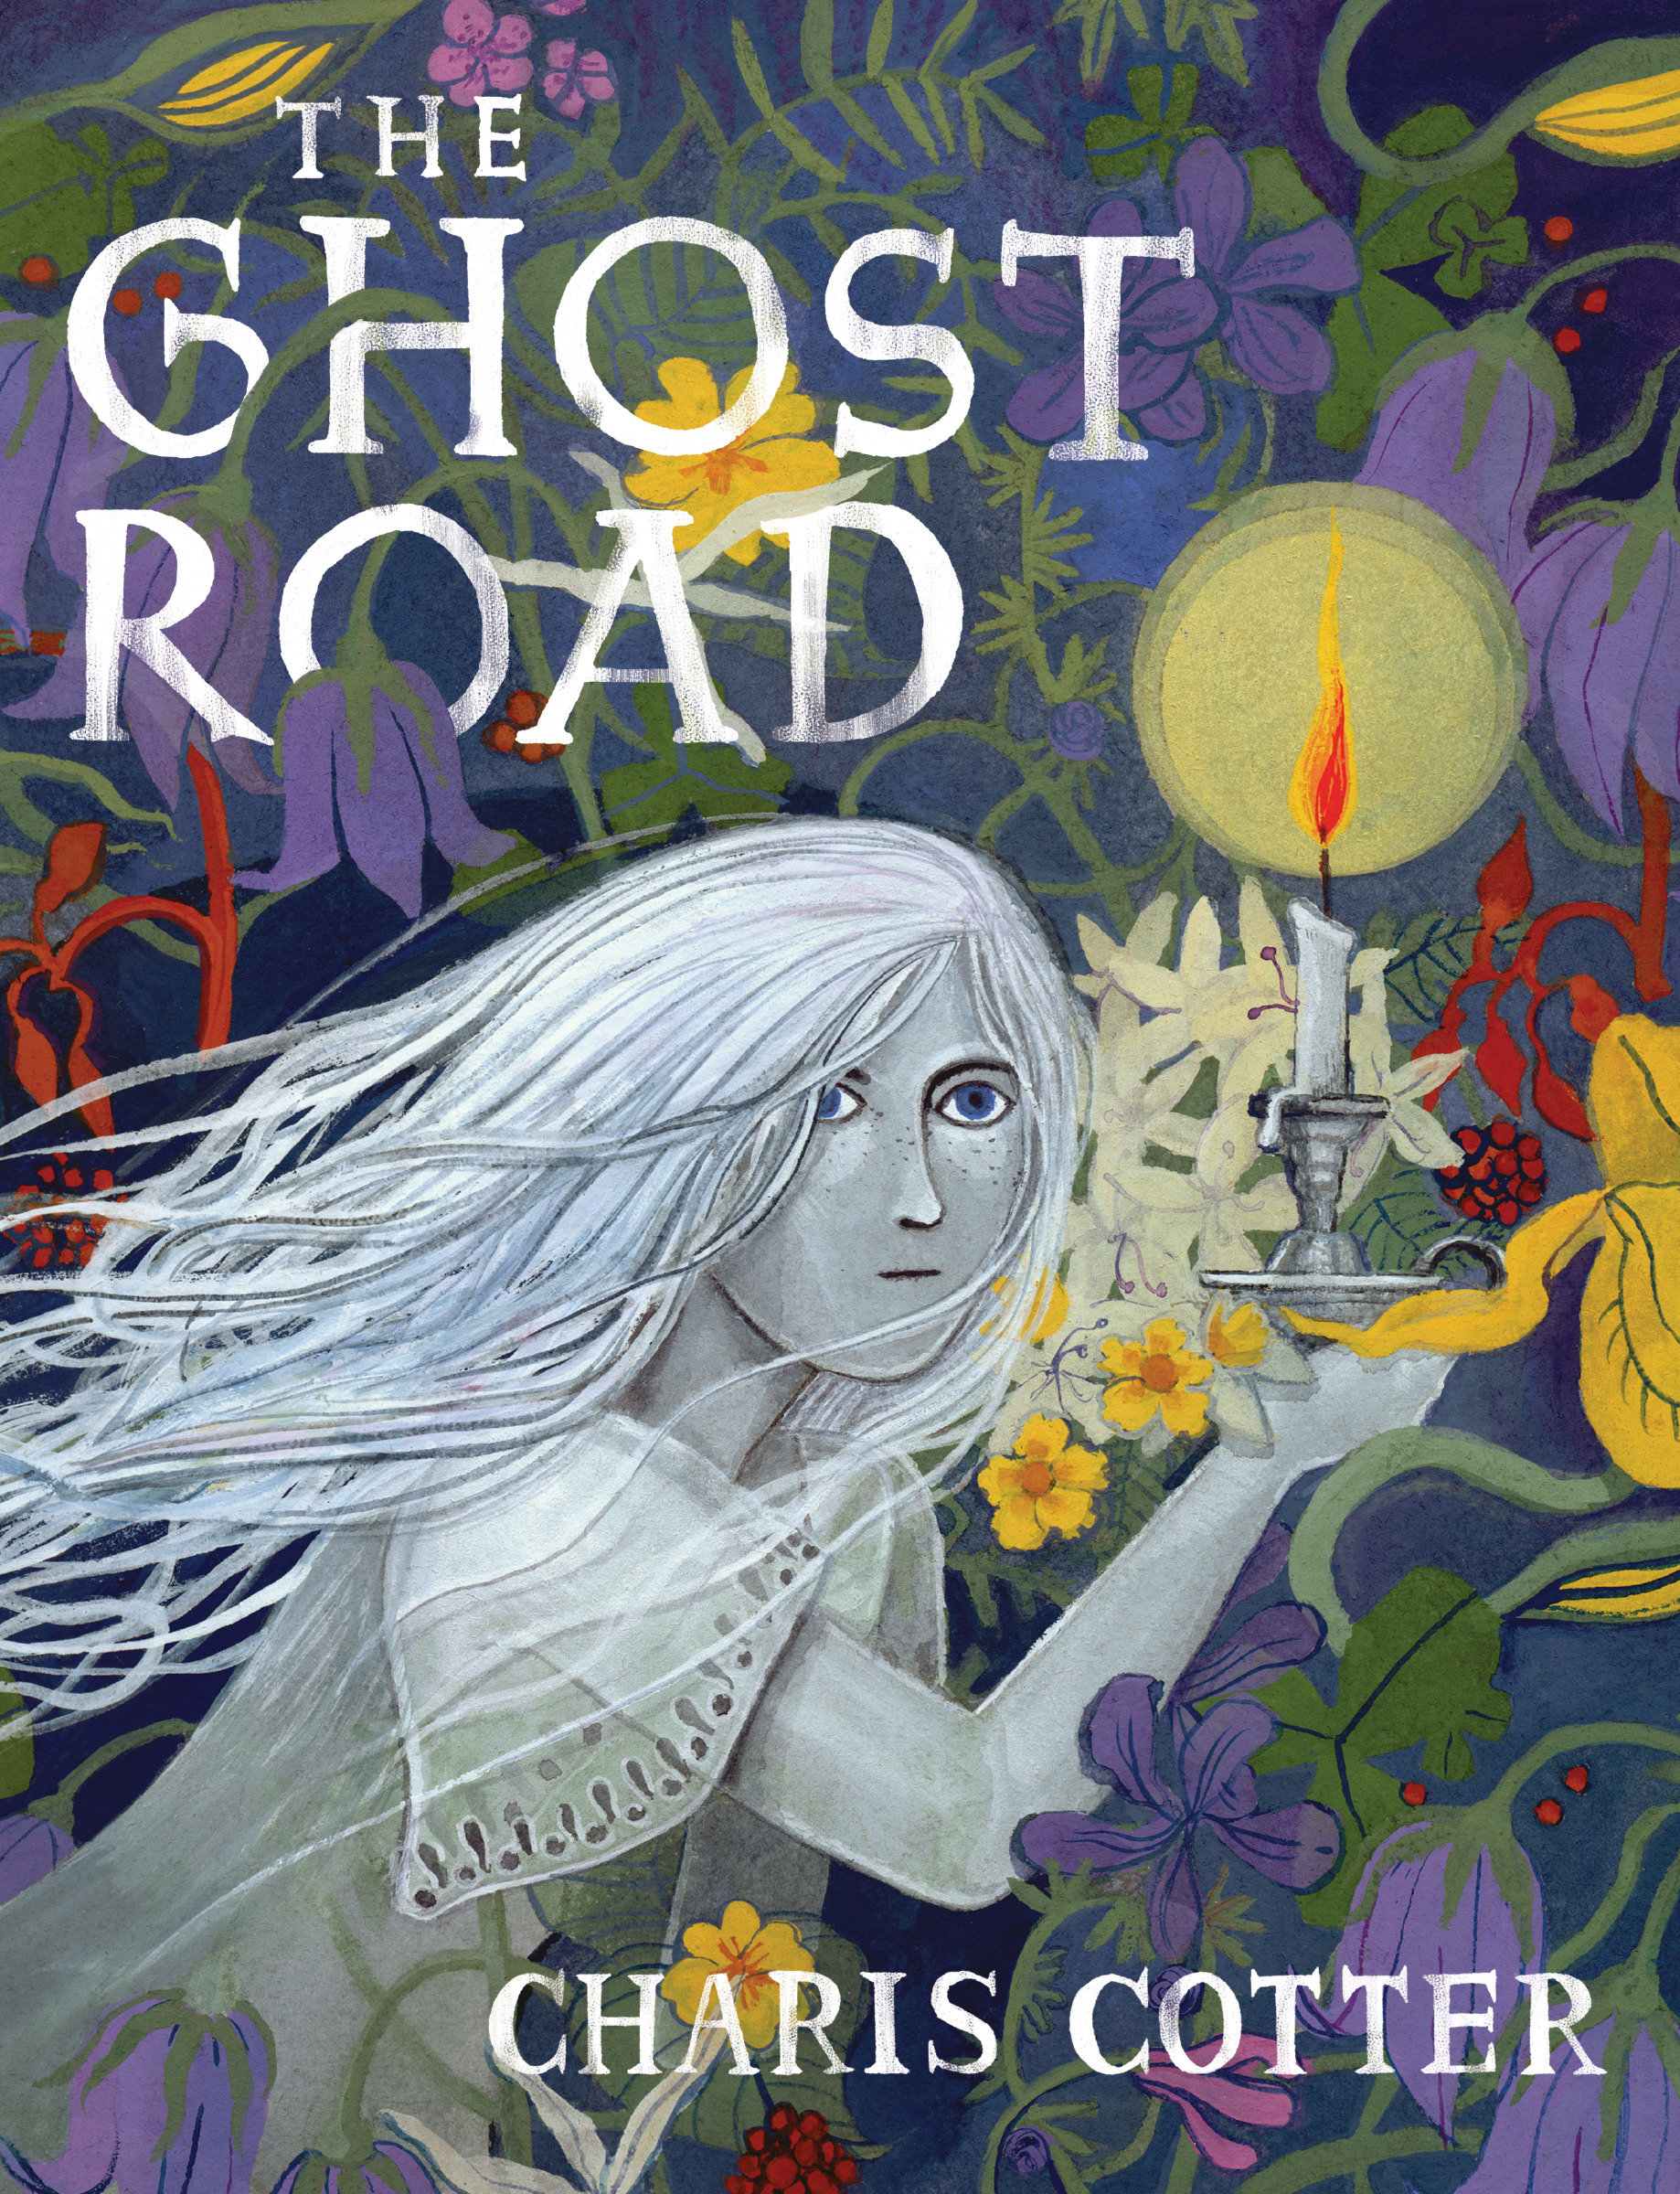 The Ghost Road (Hardcover Book)